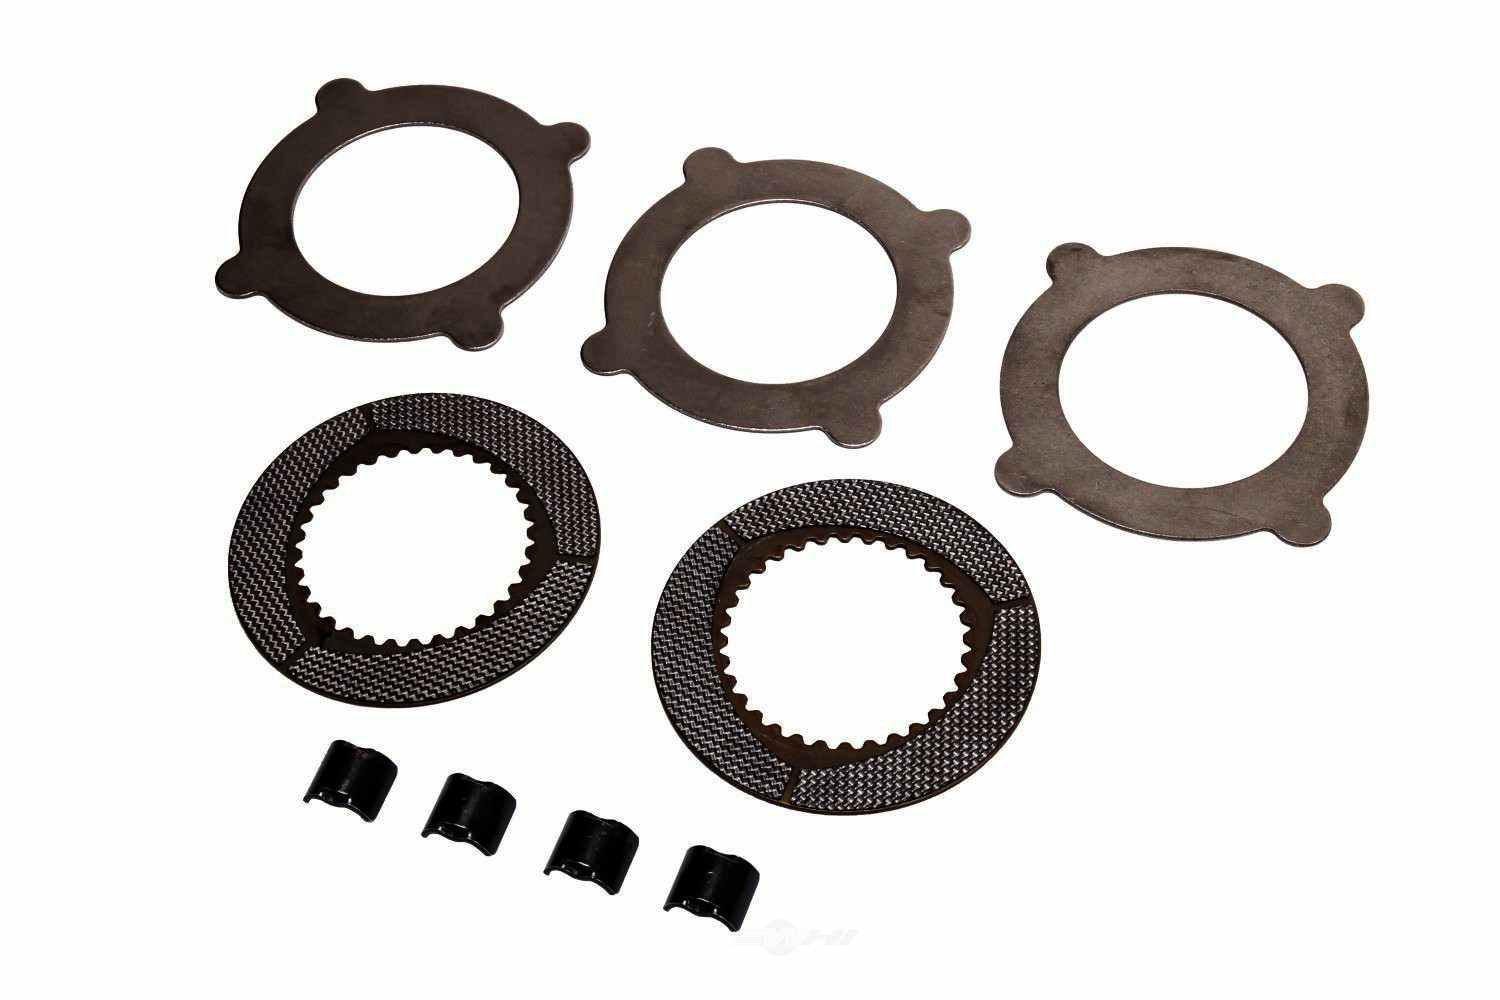 GM GENUINE PARTS - Differential Disc Kit - GMP 12471544